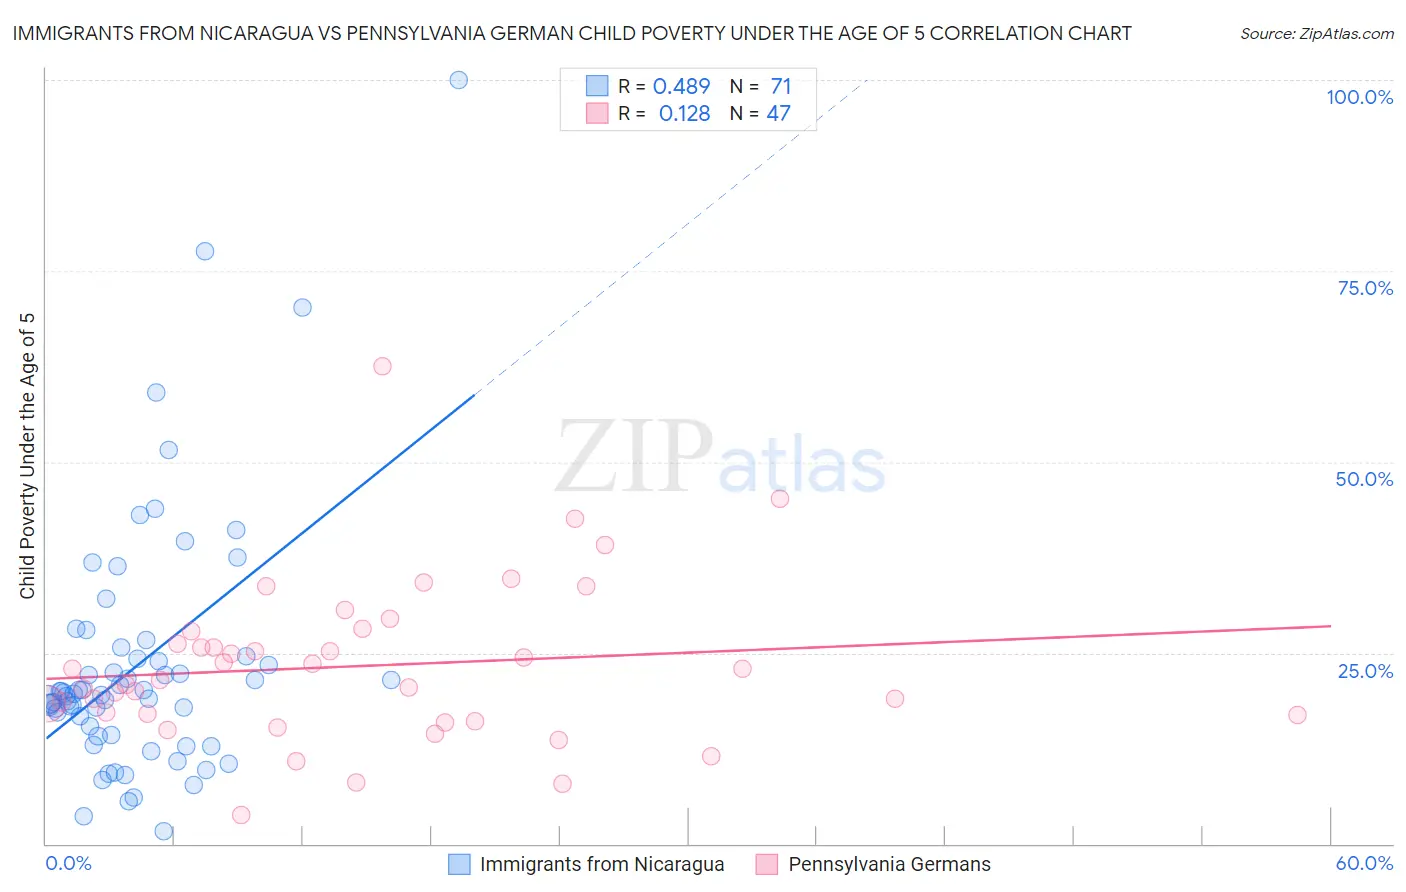 Immigrants from Nicaragua vs Pennsylvania German Child Poverty Under the Age of 5